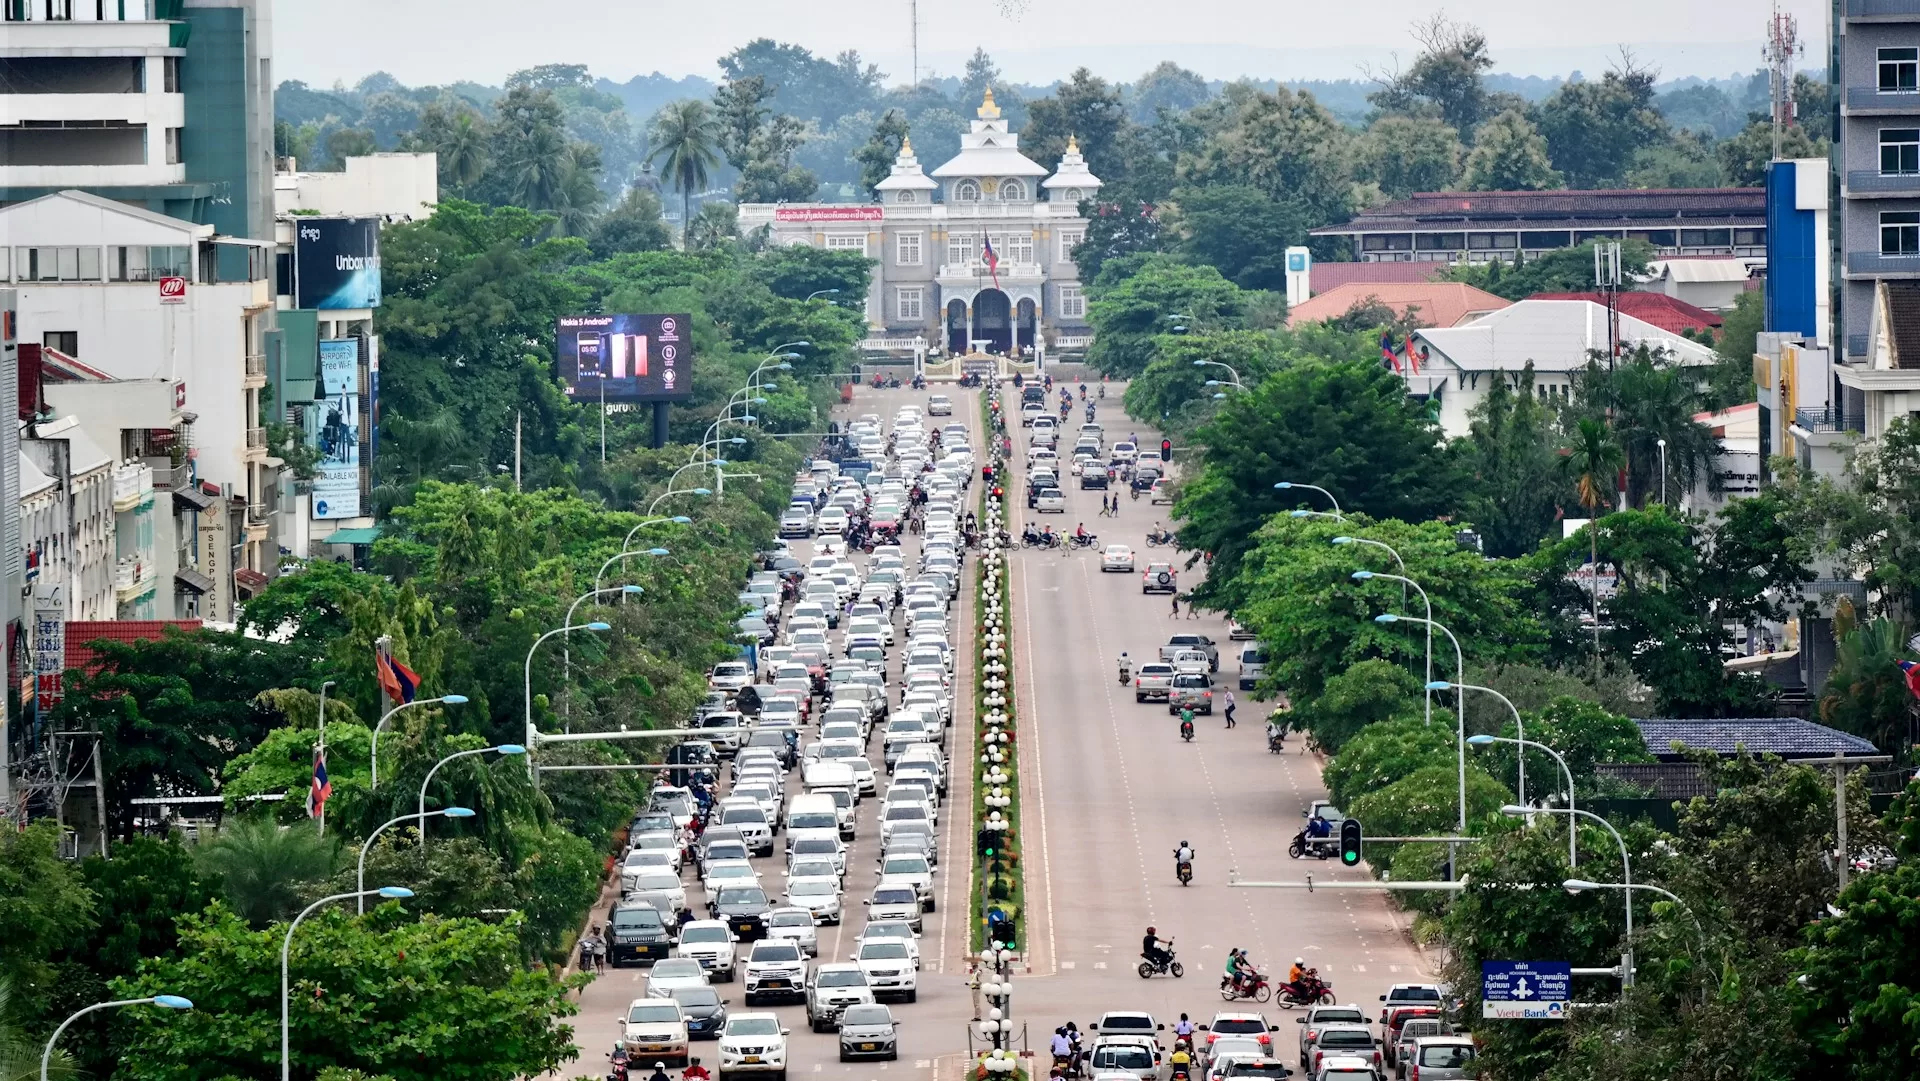 Image of Vientiane during rush hour.